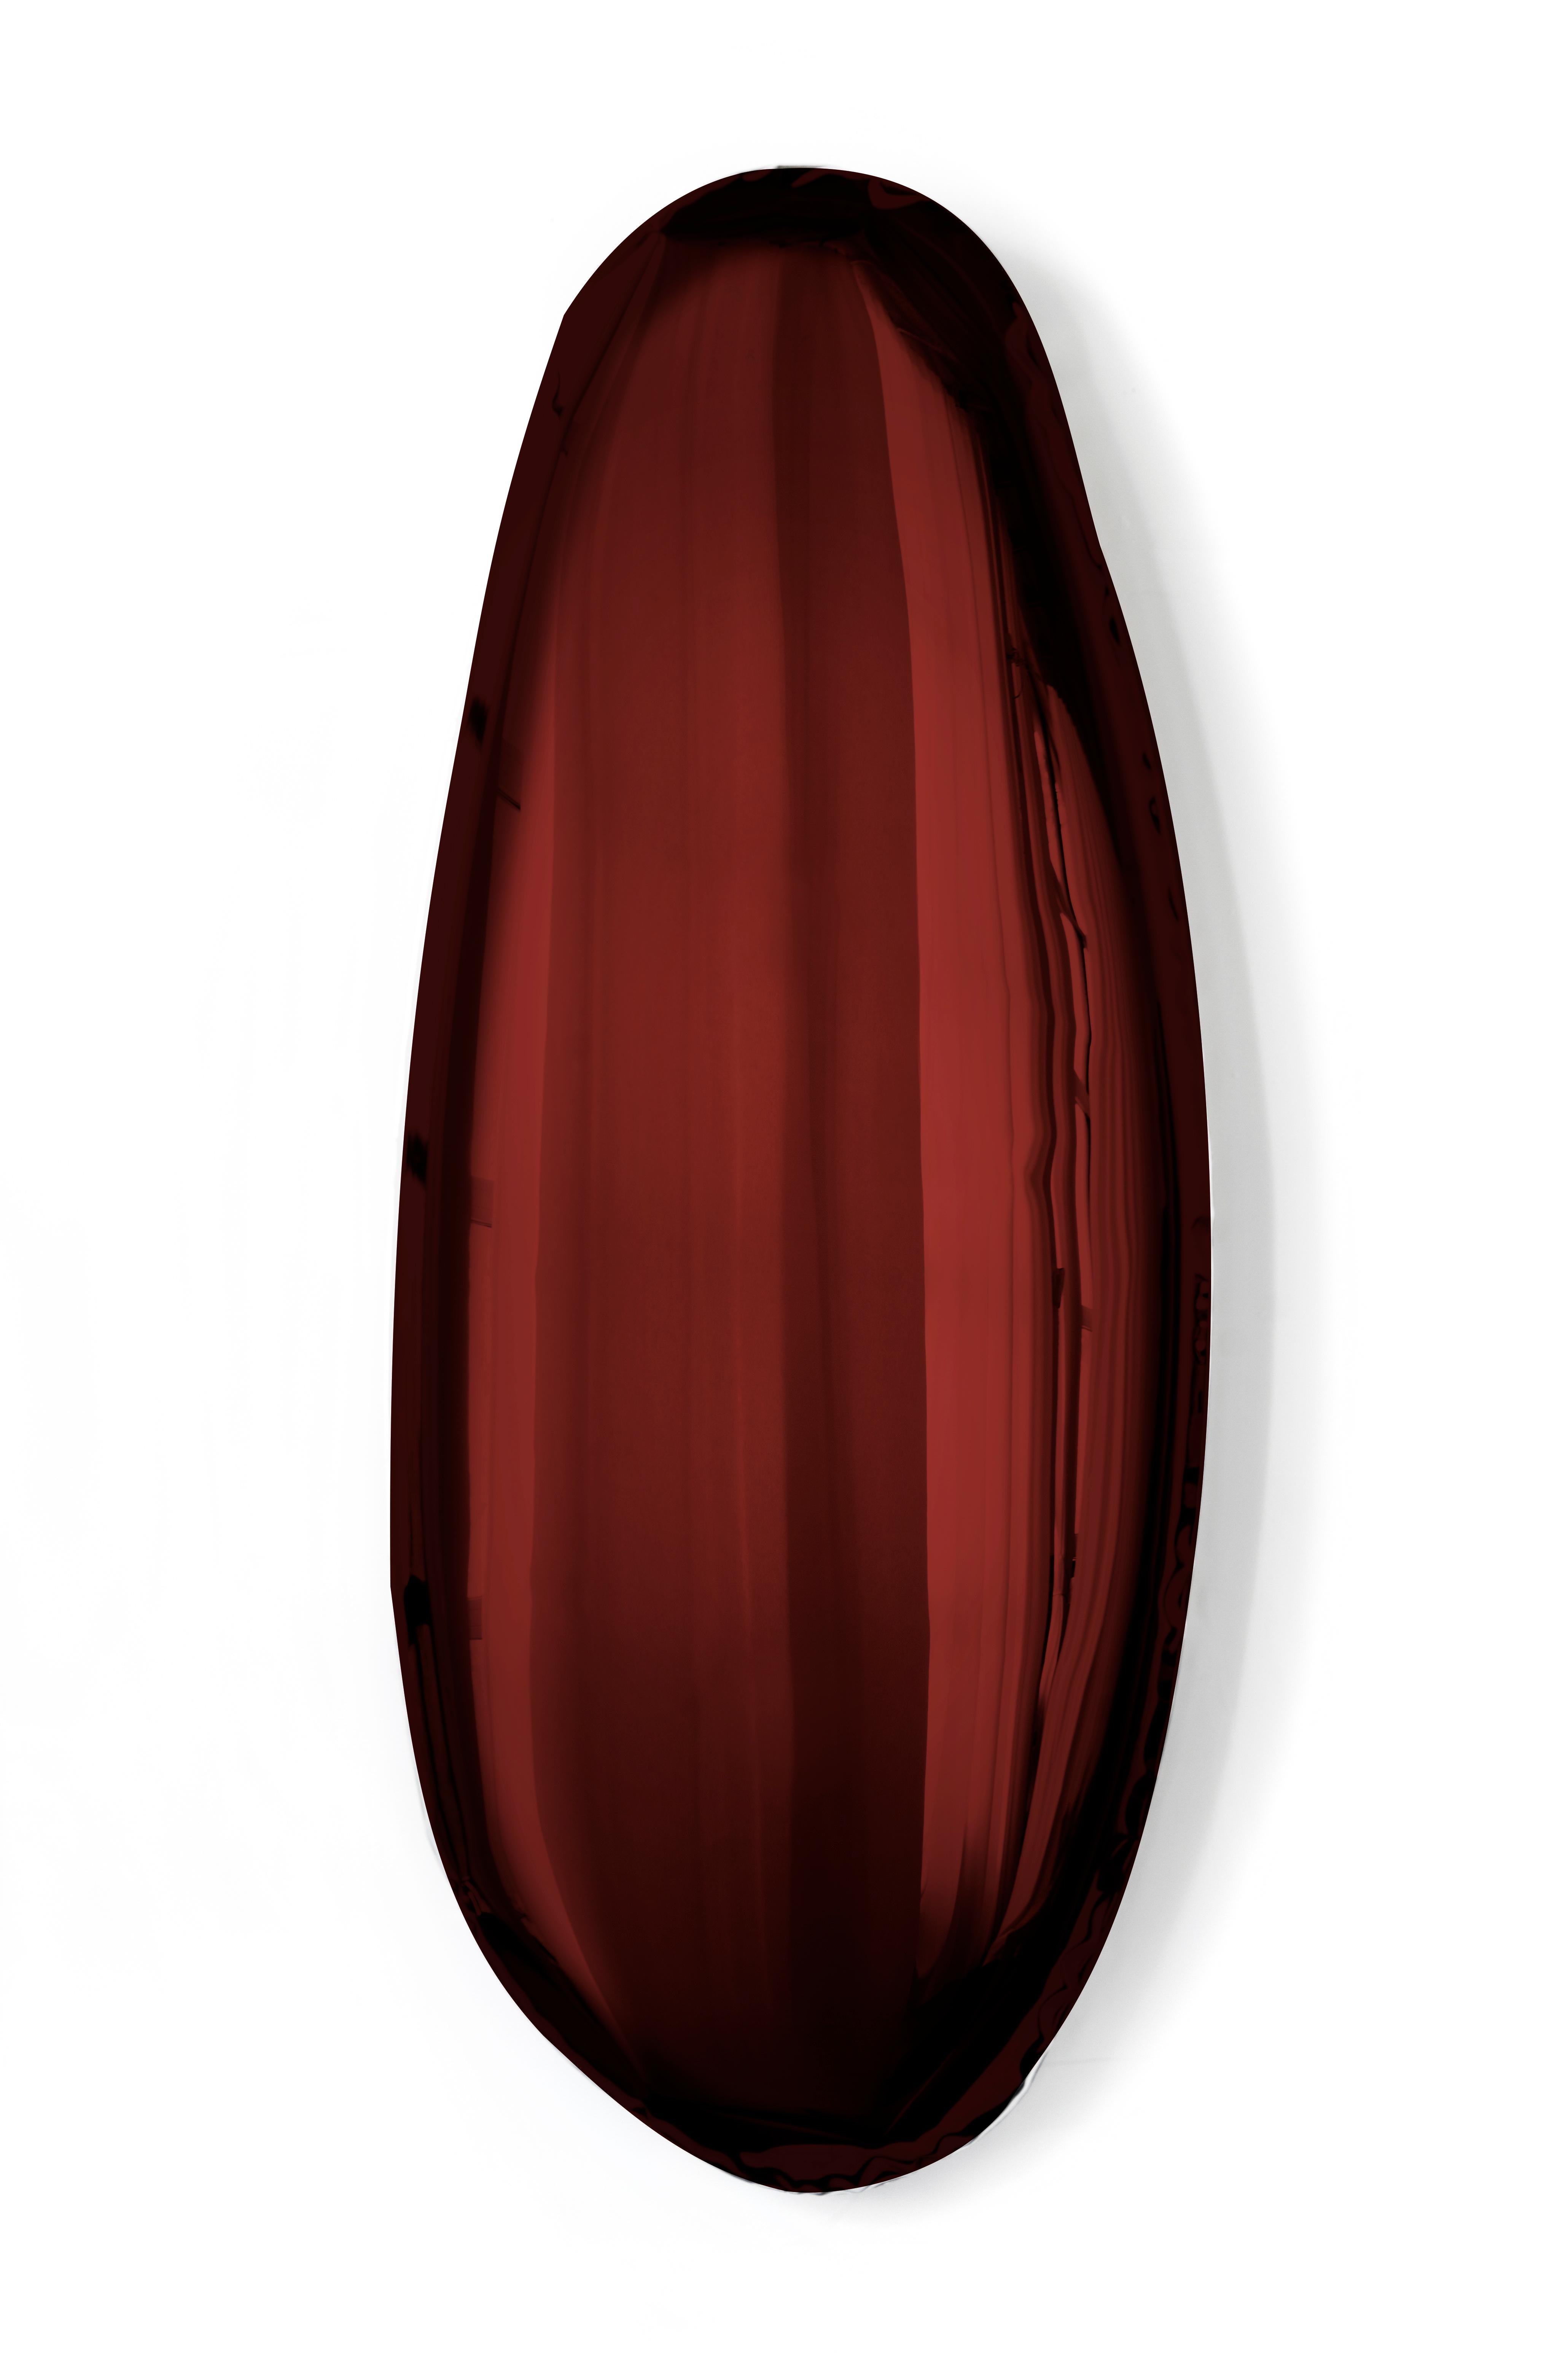 Mirror Tafla O6 Rubin Red, in Polished Stainless Steel by Zieta In New Condition For Sale In Paris, FR